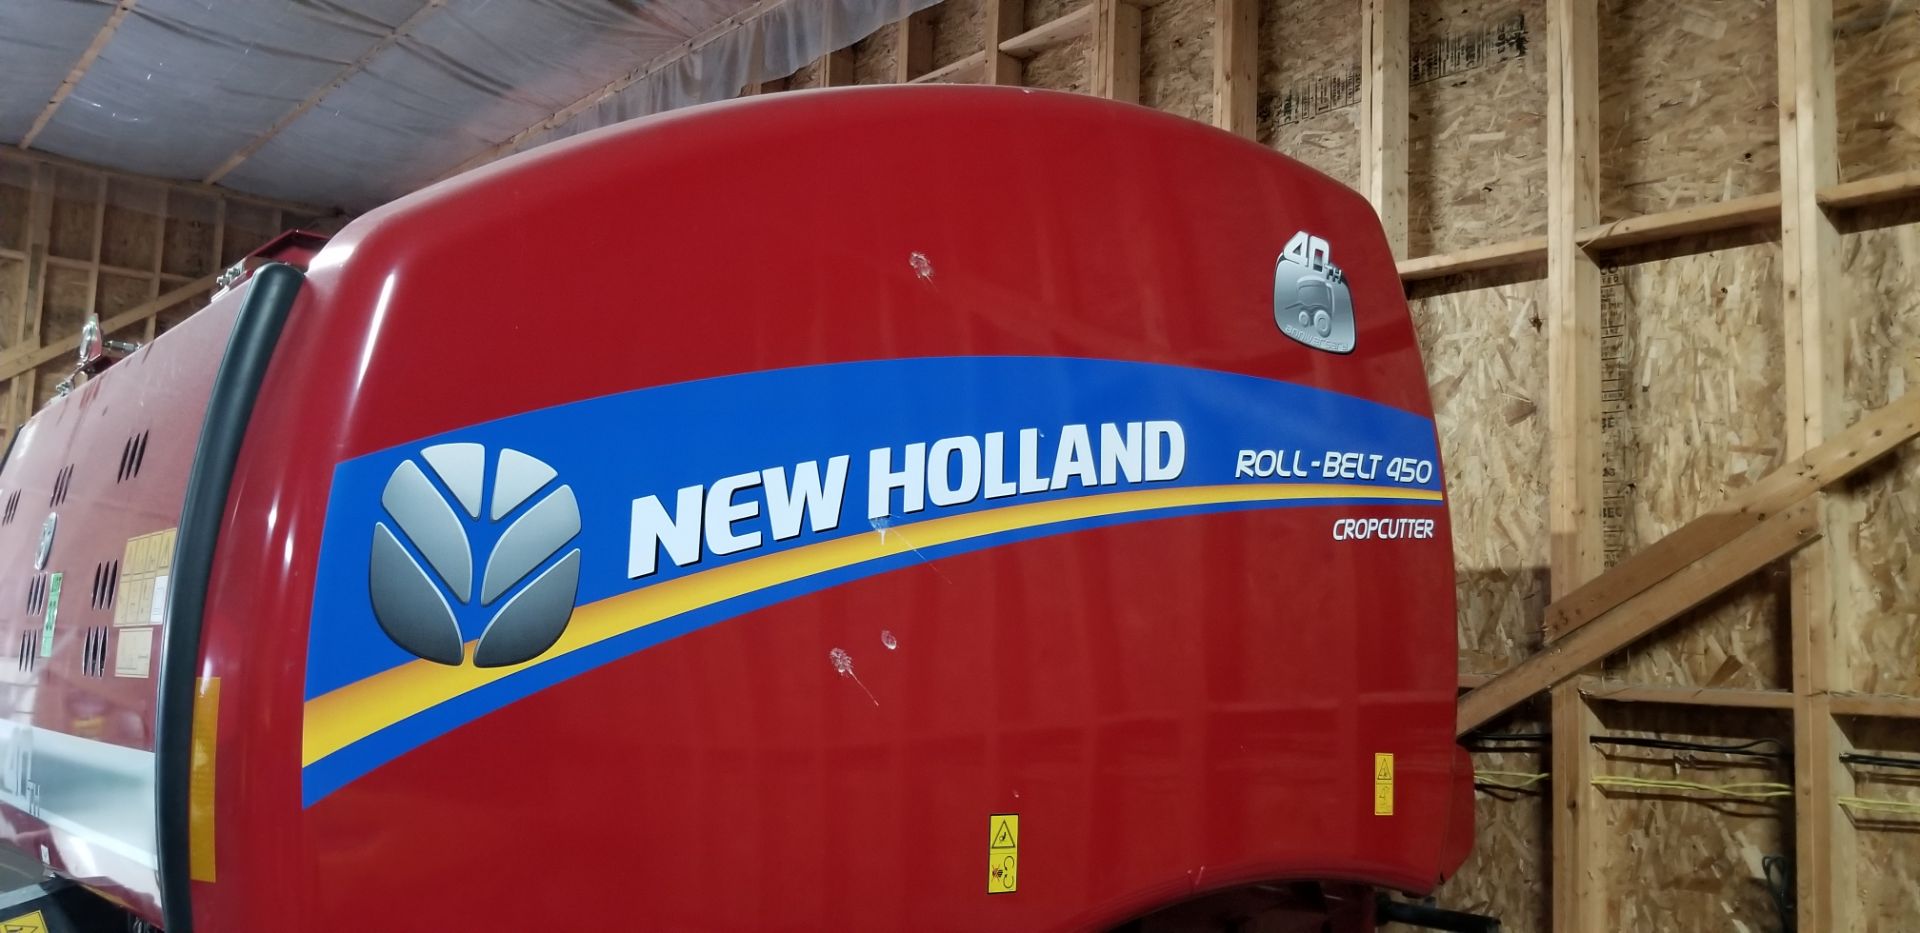 2015 NEW HOLLAND 49TH RB450 Round Baler - Image 2 of 3